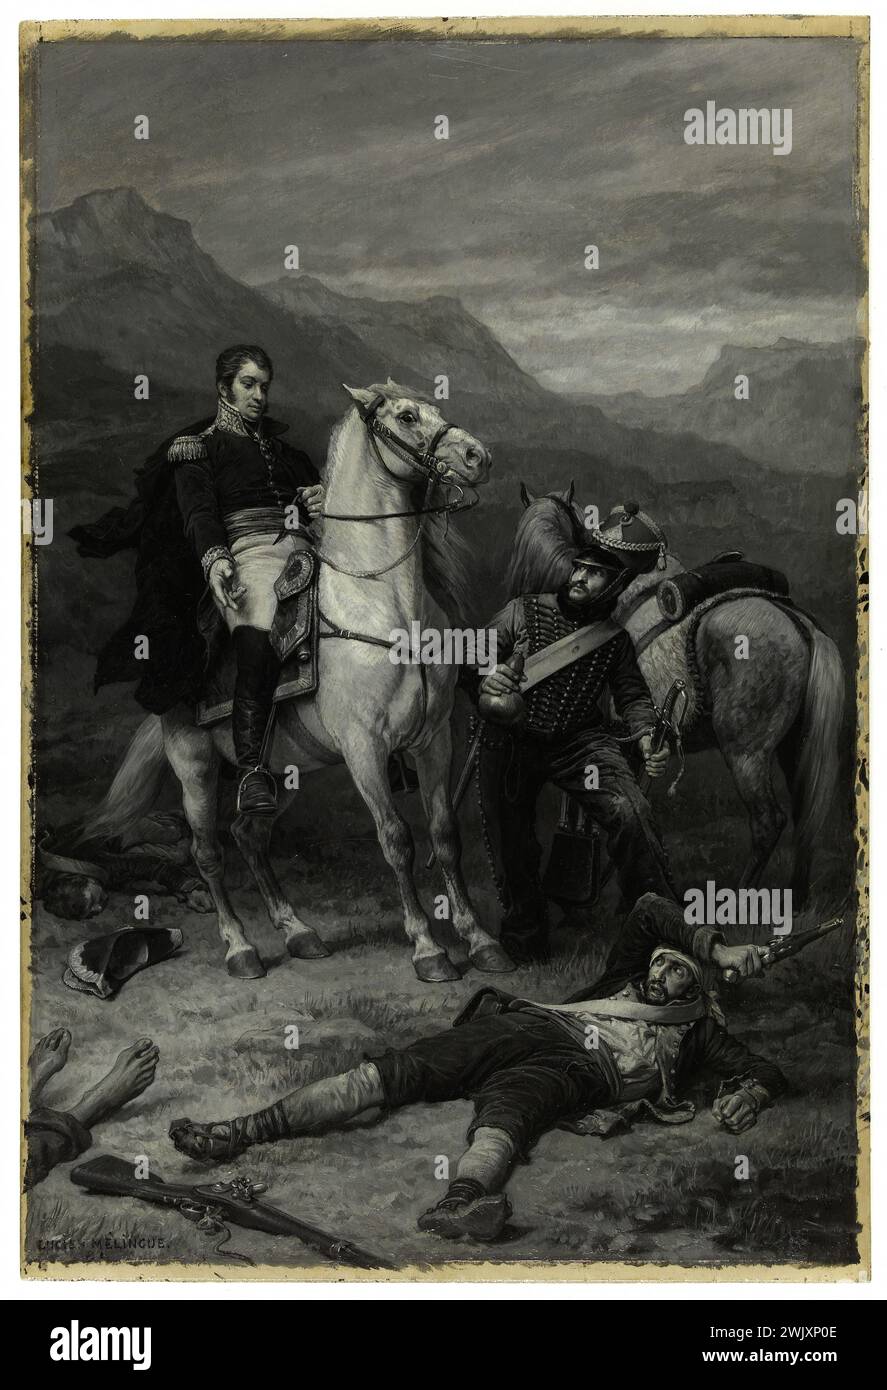 Lucien MELINGUE after the battle. Wood oil, around 1881. Paris, Victor Hugo's house. Hauteville House. 74741-15 Weapon, battle, injure, horse, Spanish, gourd, oil on wood, mountain, pistol, French writer poem Stock Photo